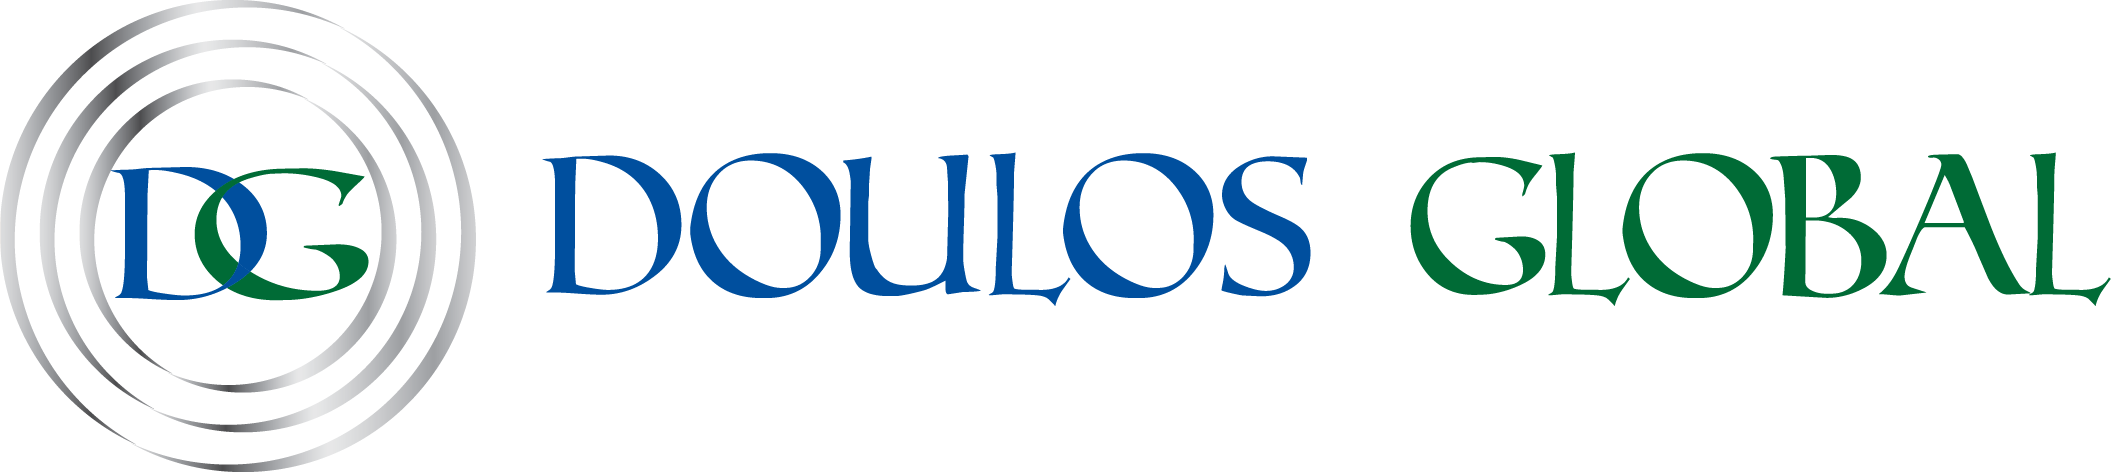 Doulos Global Ministries 